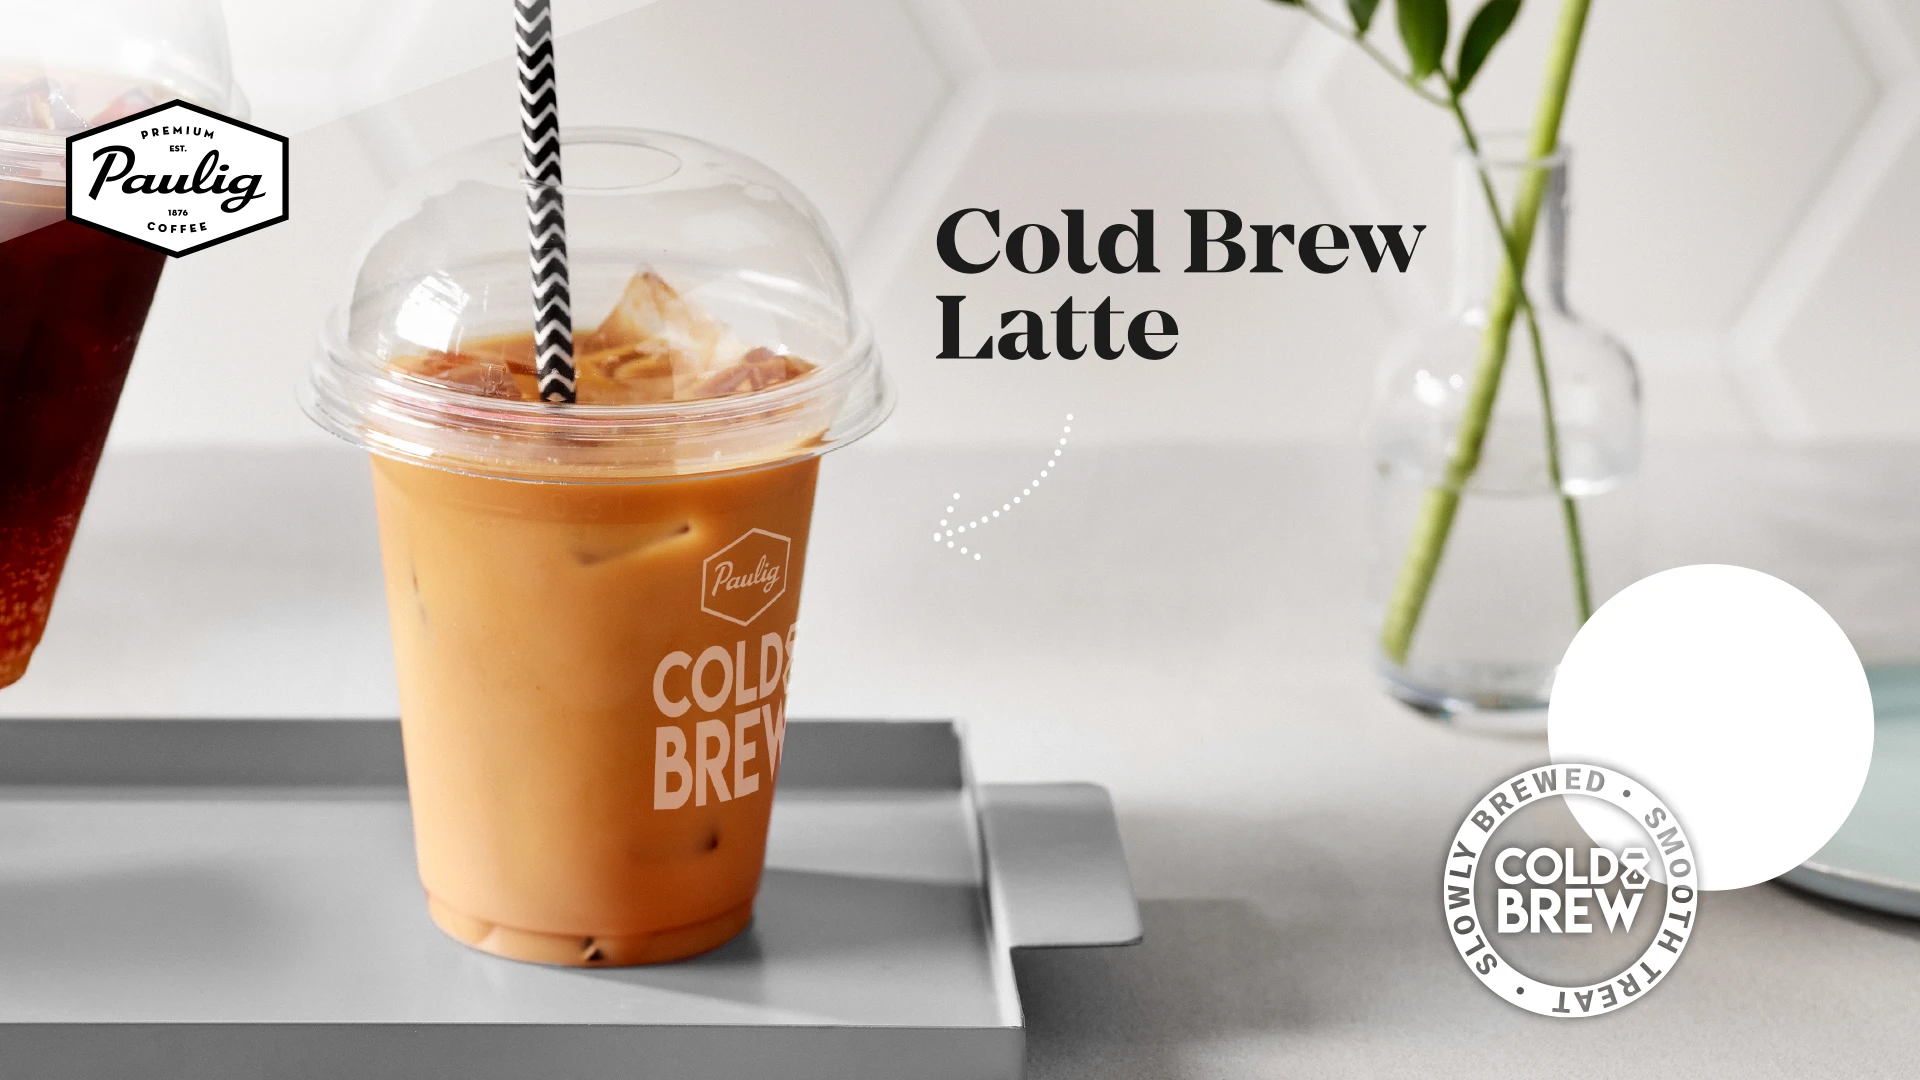 Paulig Cold Brew 2022 POS cold brew latte 1920x1080px